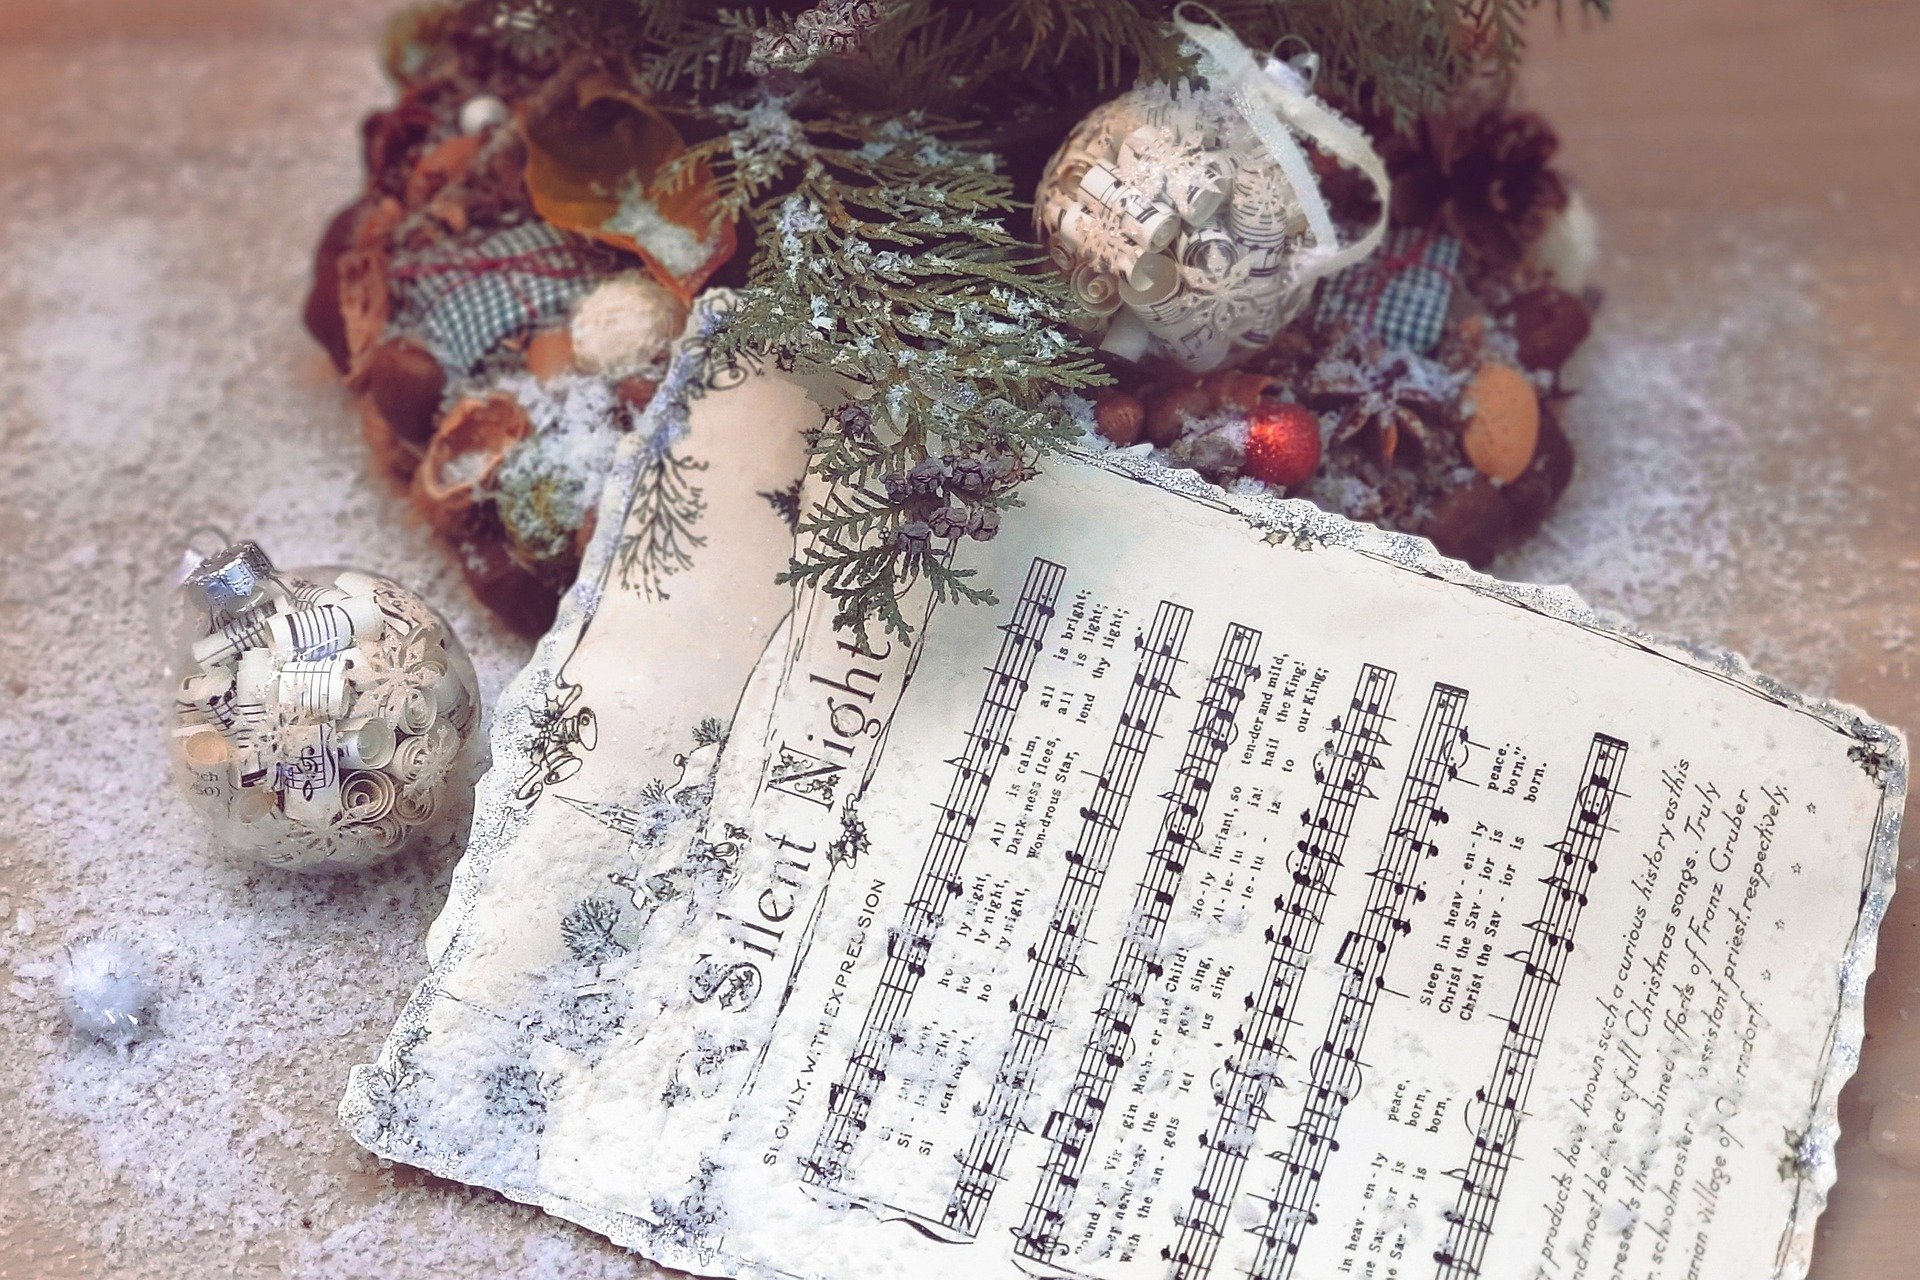 Sheet music and home decorations.